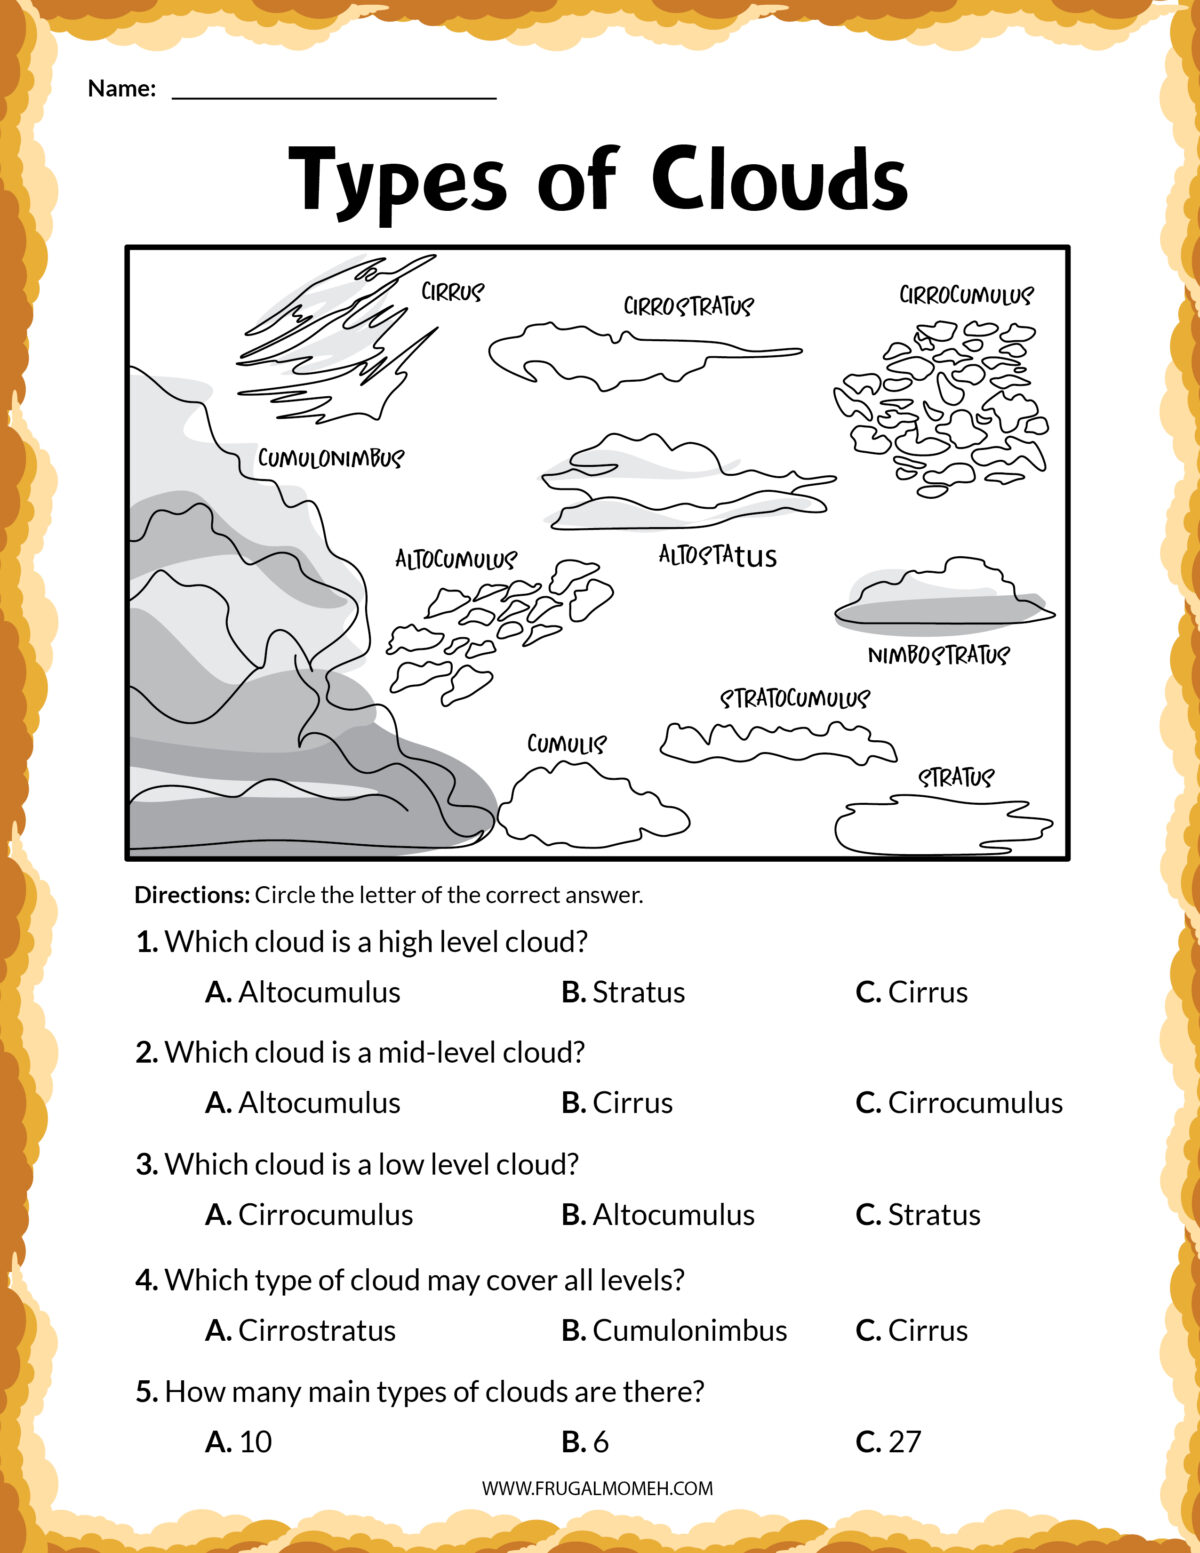 Types of clouds printable sheet..